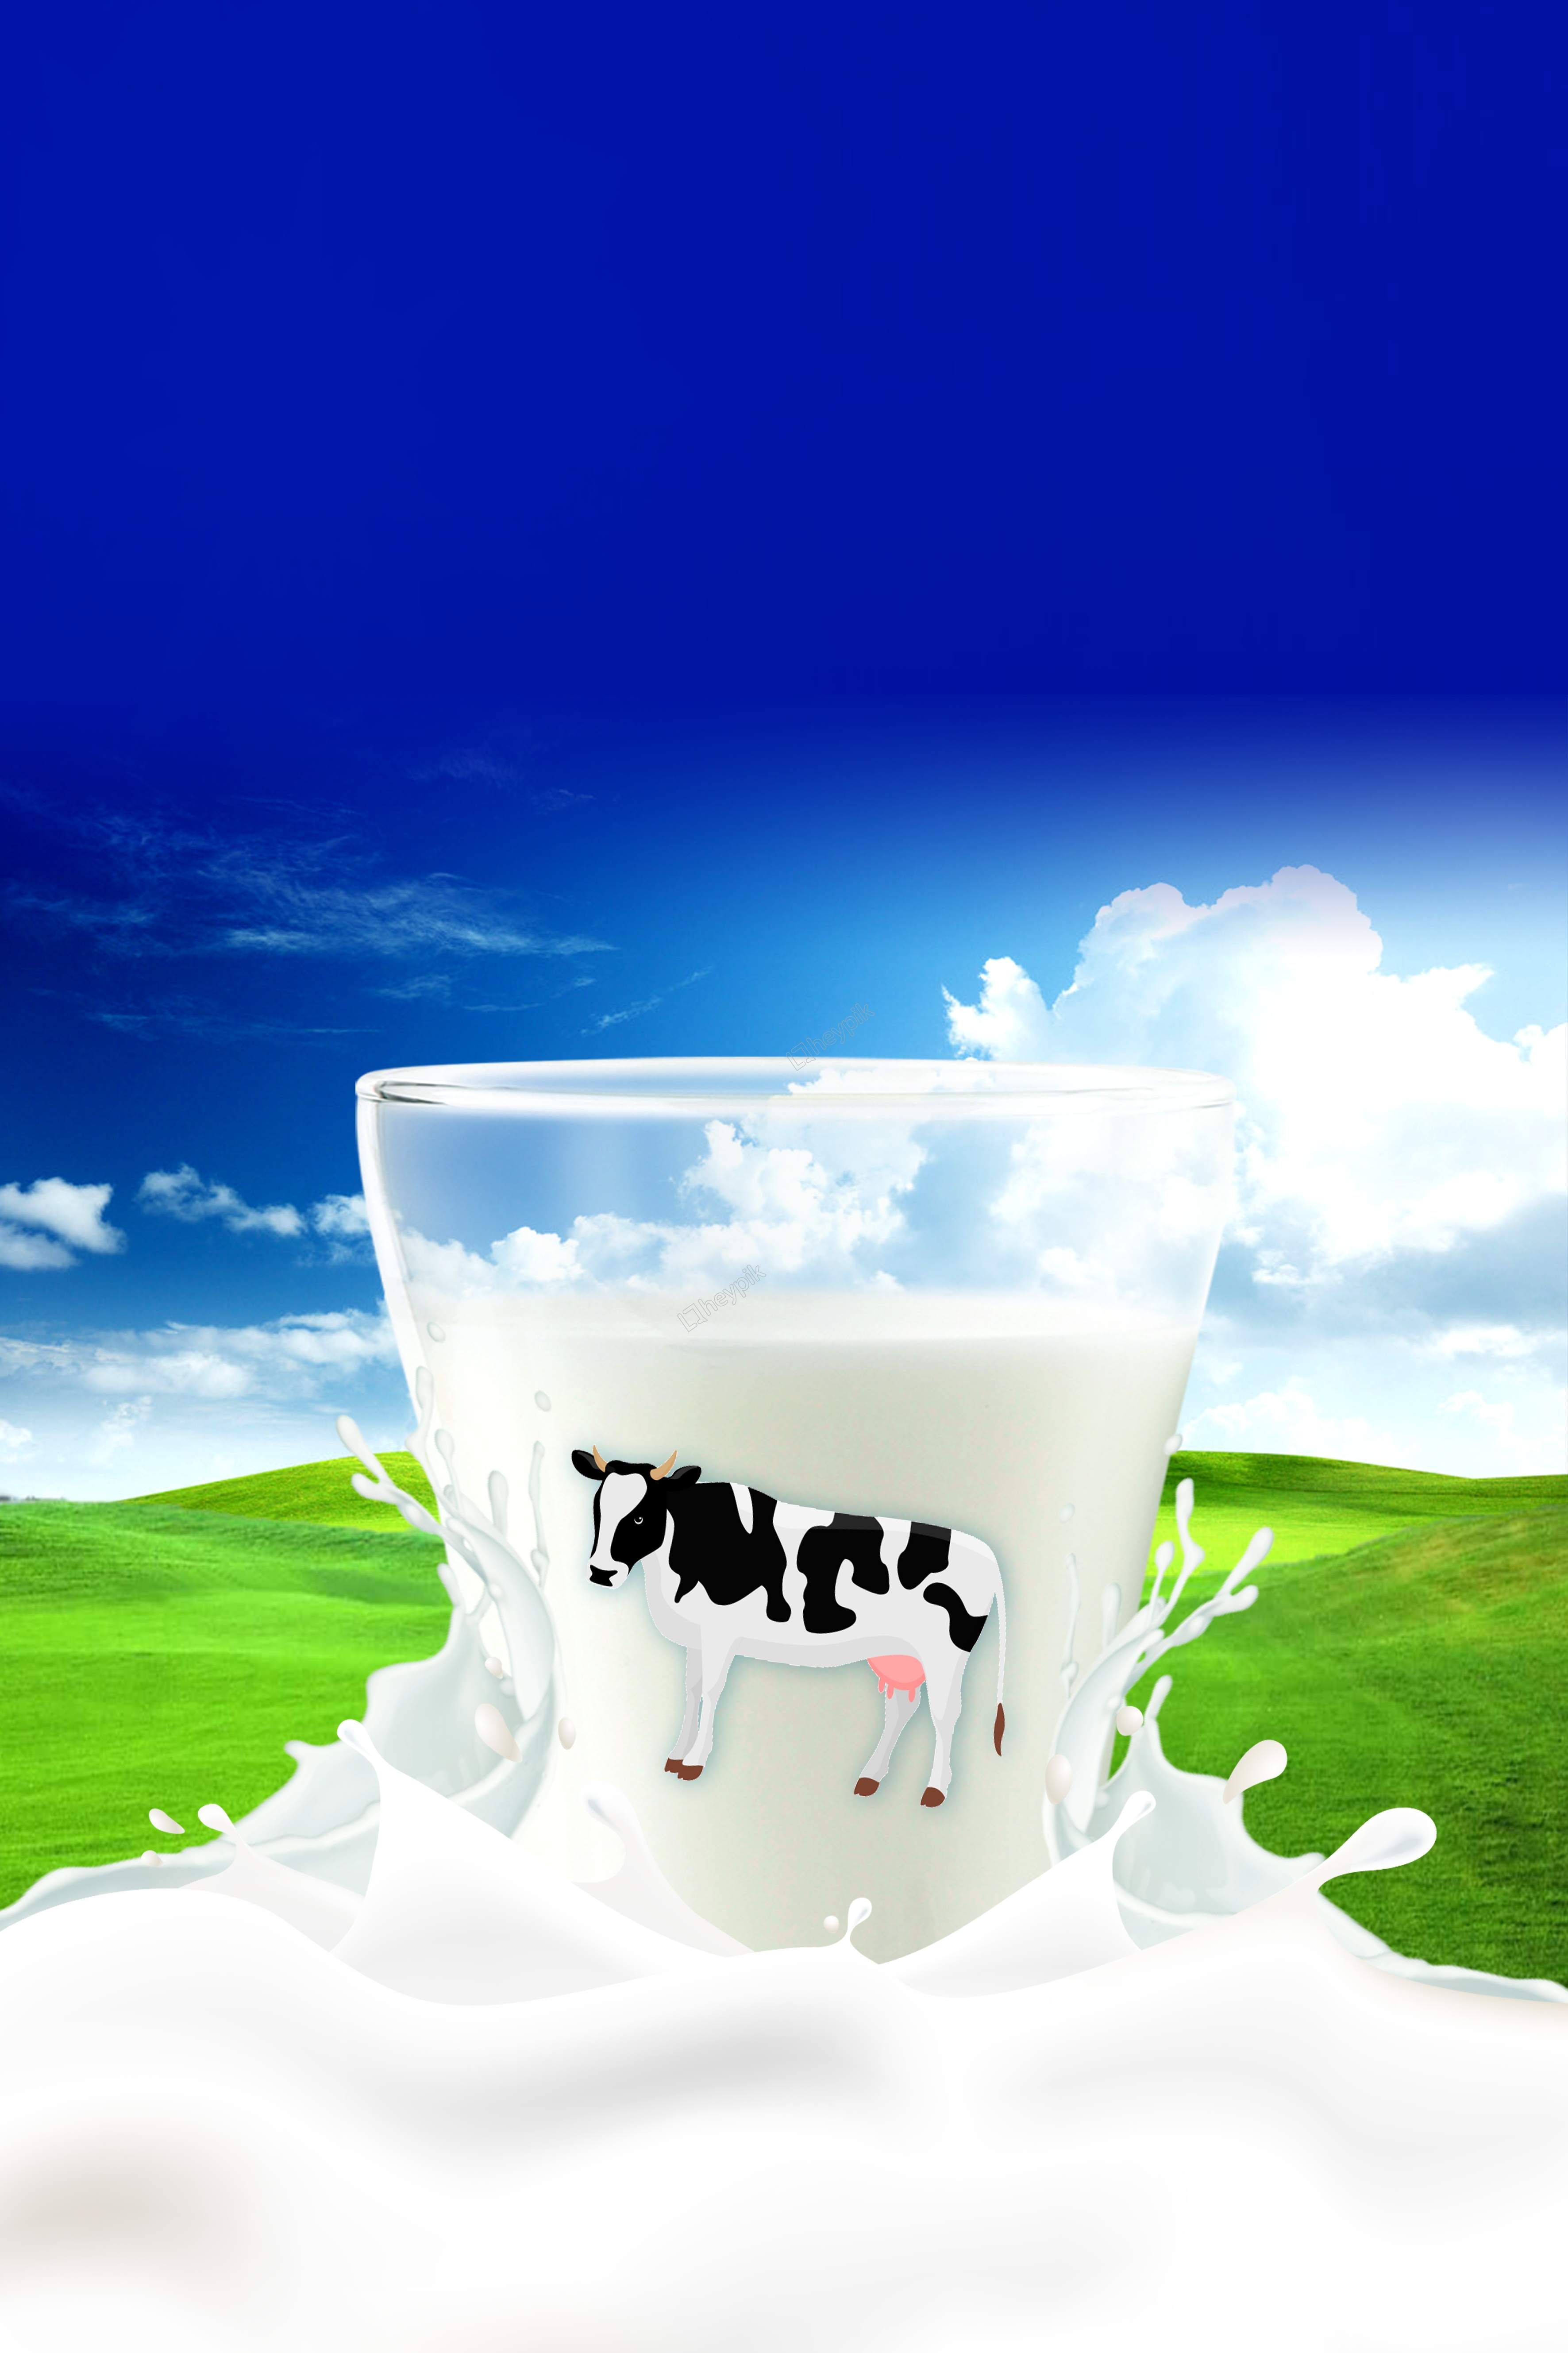 Free download Some Dairy Products Shot On Reflective White Background ...